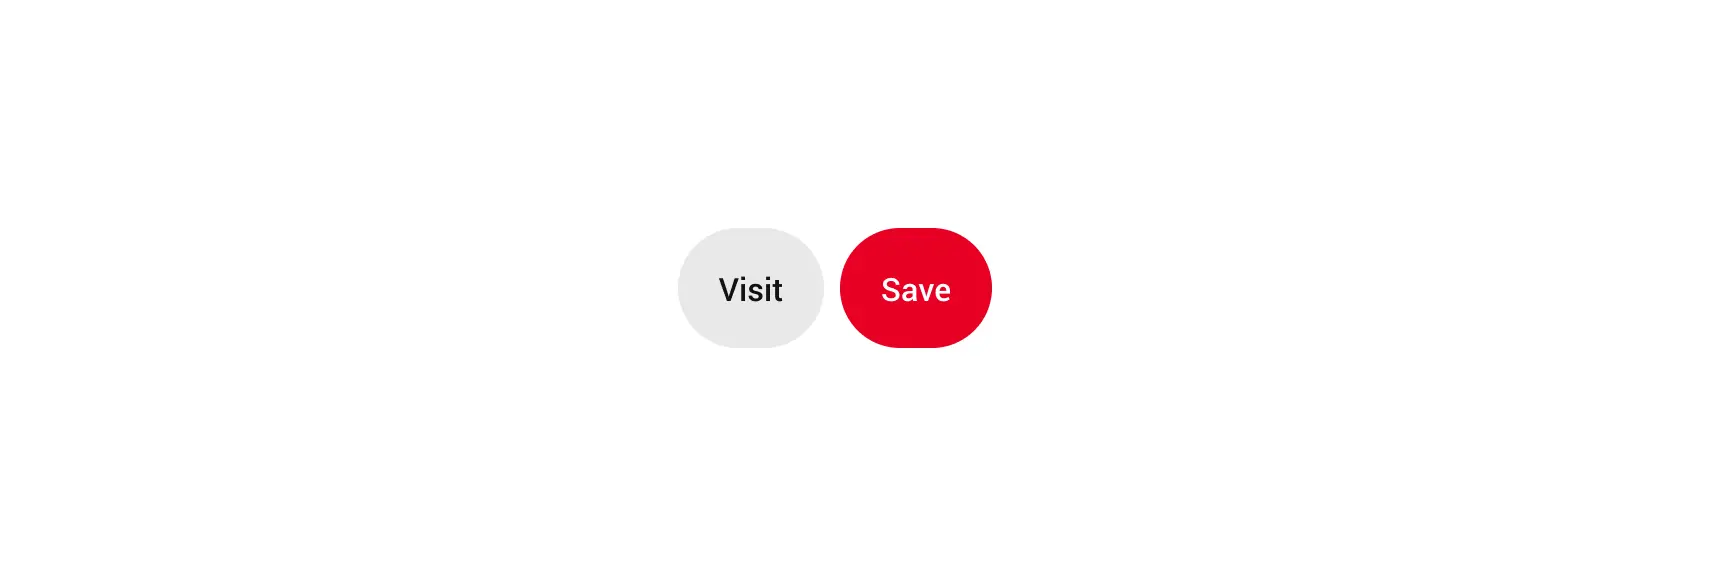 A set of two buttons side by side. The left button is secondary and the right button is primary. 